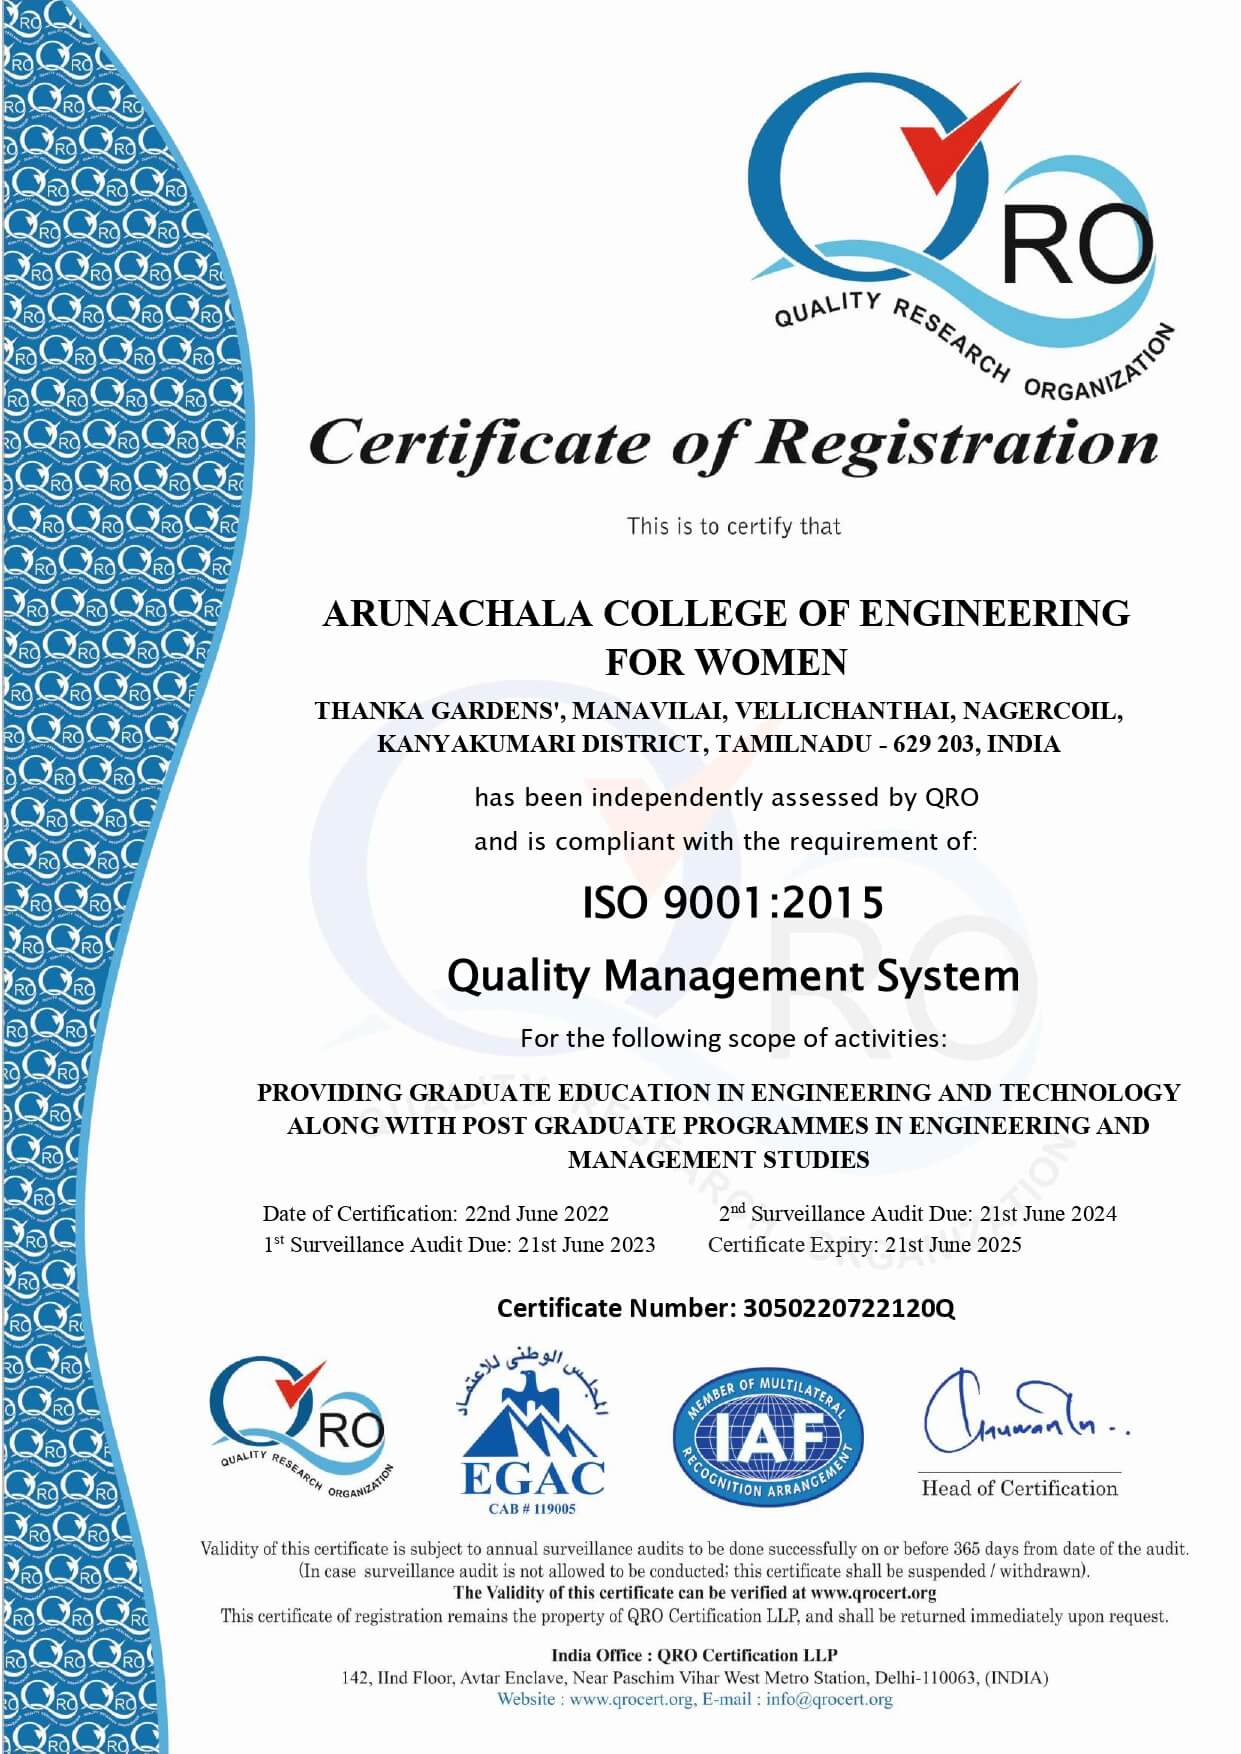 Arunachala College of Engineering for Women has received Iso 9001:2015 quality Management System award from quality research organization.